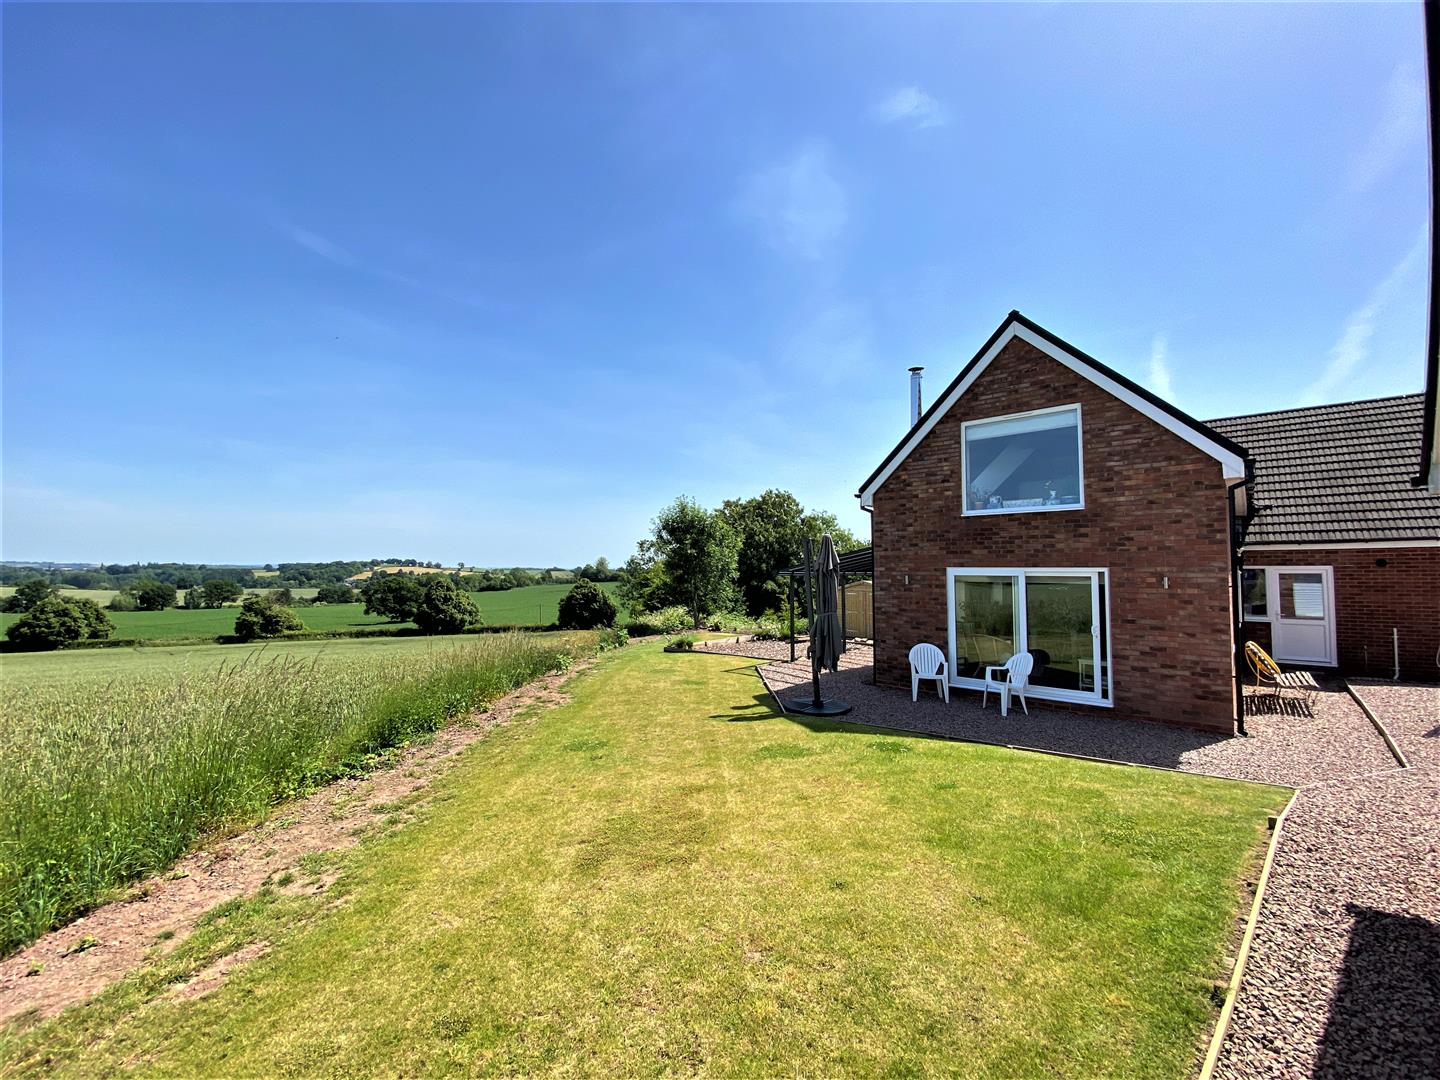 4 bed detached for sale in Eaton Bishop, HR2